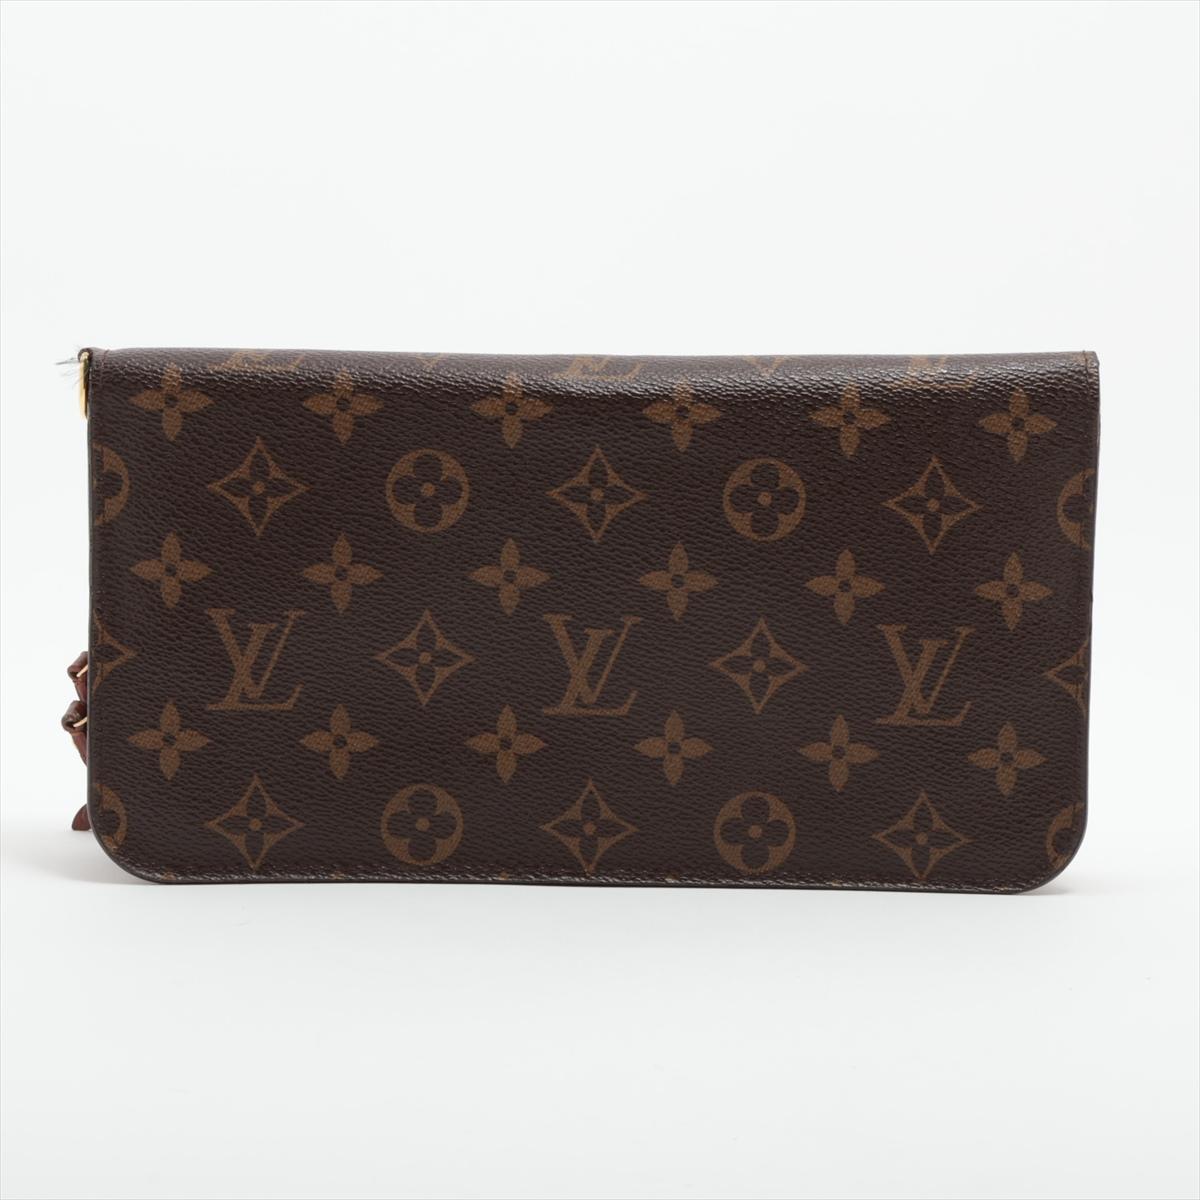 The Louis Vuitton Monogram Organizer Insolite is an exquisite and functional accessory designed to enhance your everyday life with a touch of luxury. Crafted in the iconic Monogram canvas, the organizer reflects Louis Vuitton's commitment to